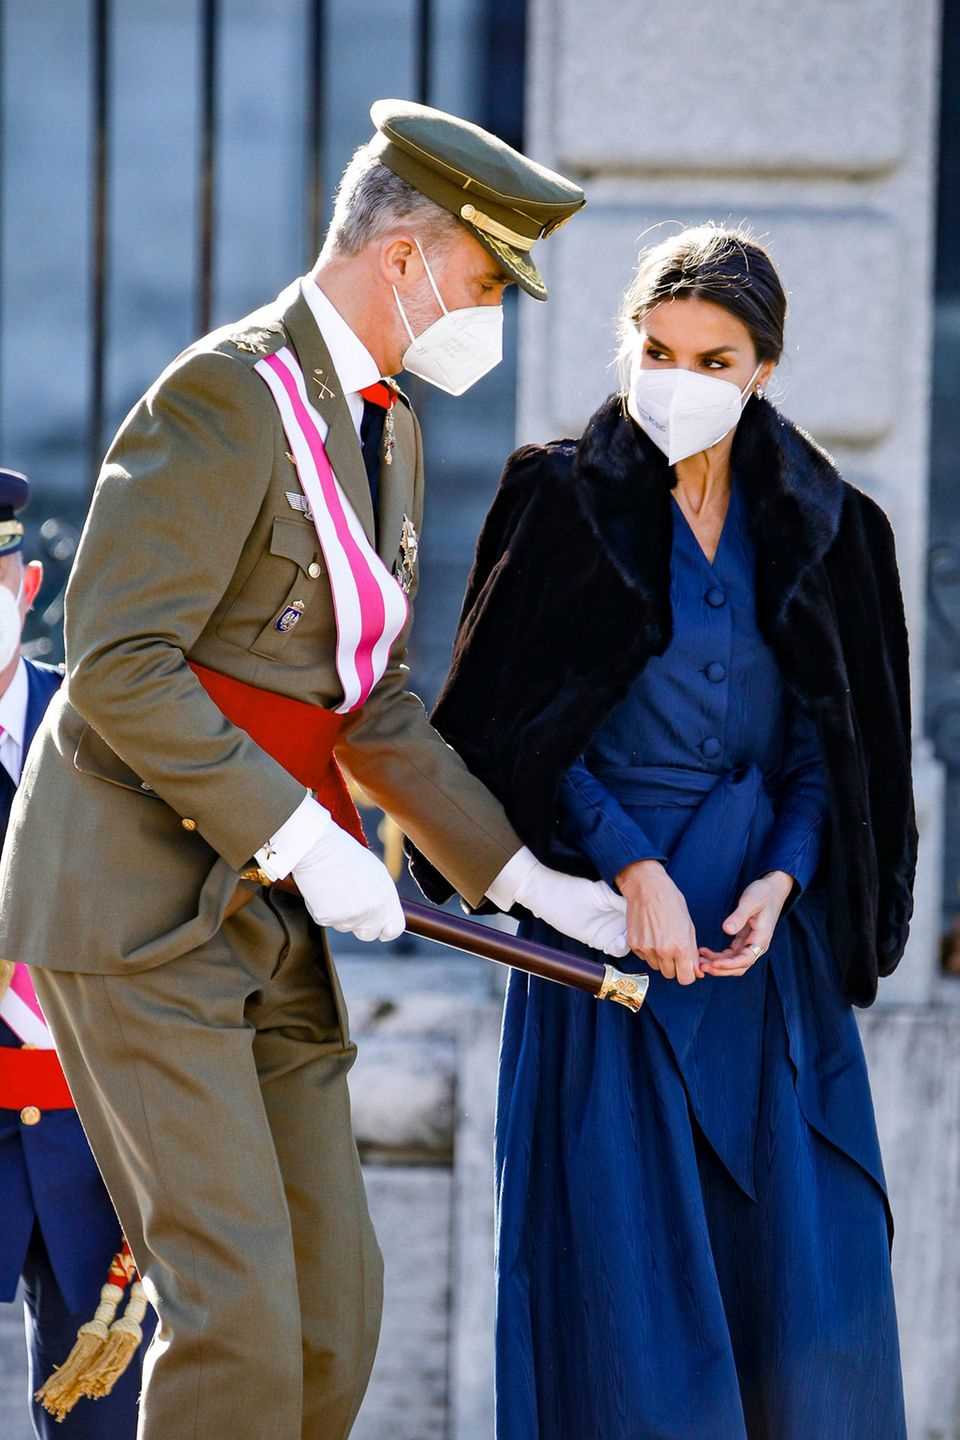 King Felipe picks up Queen Letizia's brooch and gives it to her